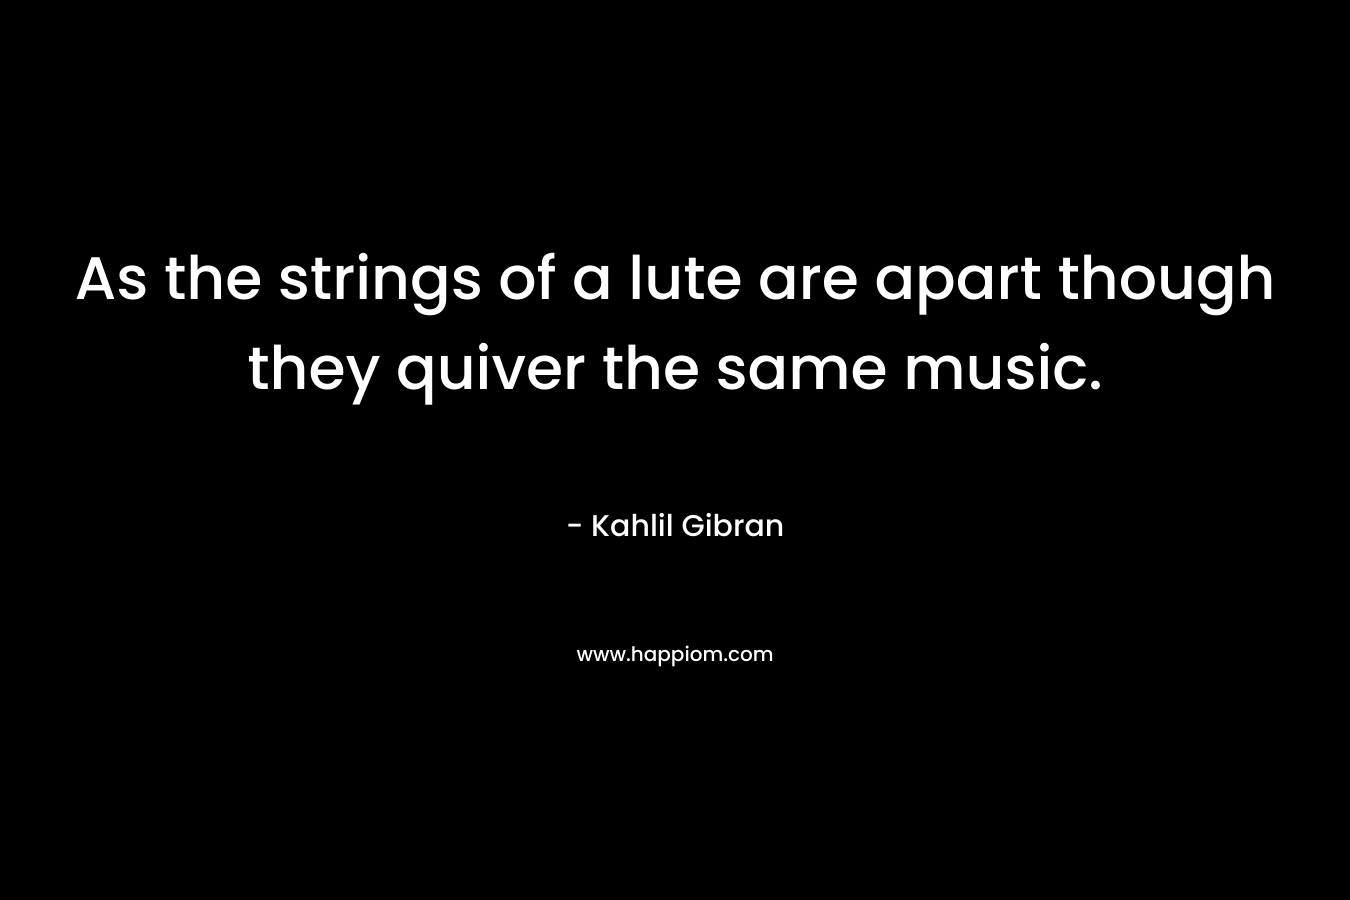 As the strings of a lute are apart though they quiver the same music. – Kahlil Gibran